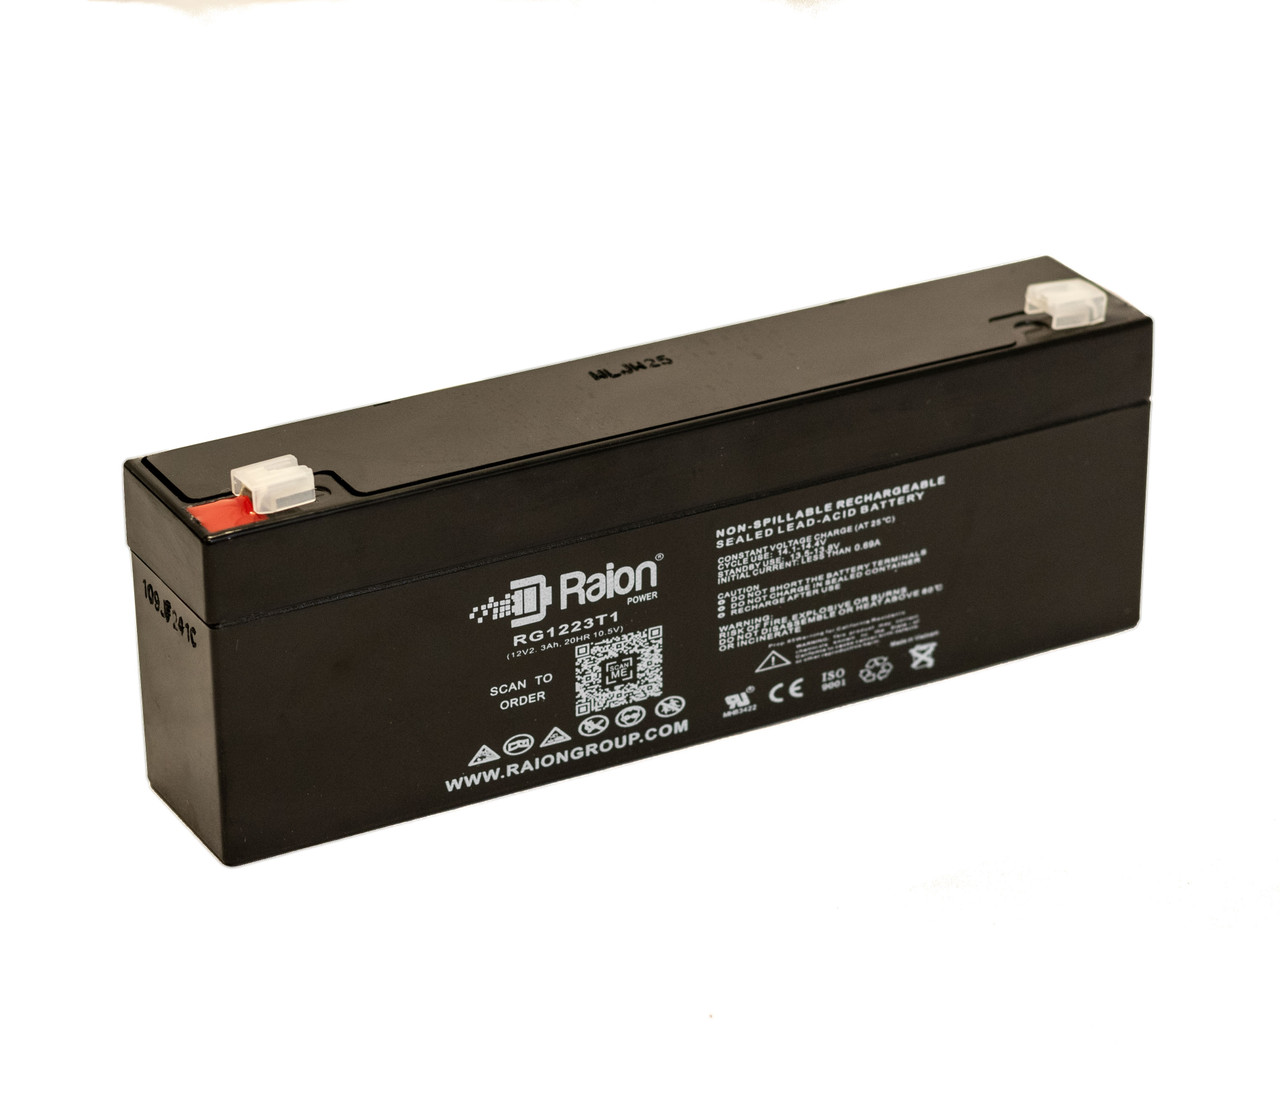 Raion Power RG1223T1 Replacement Battery for Union MX-12020